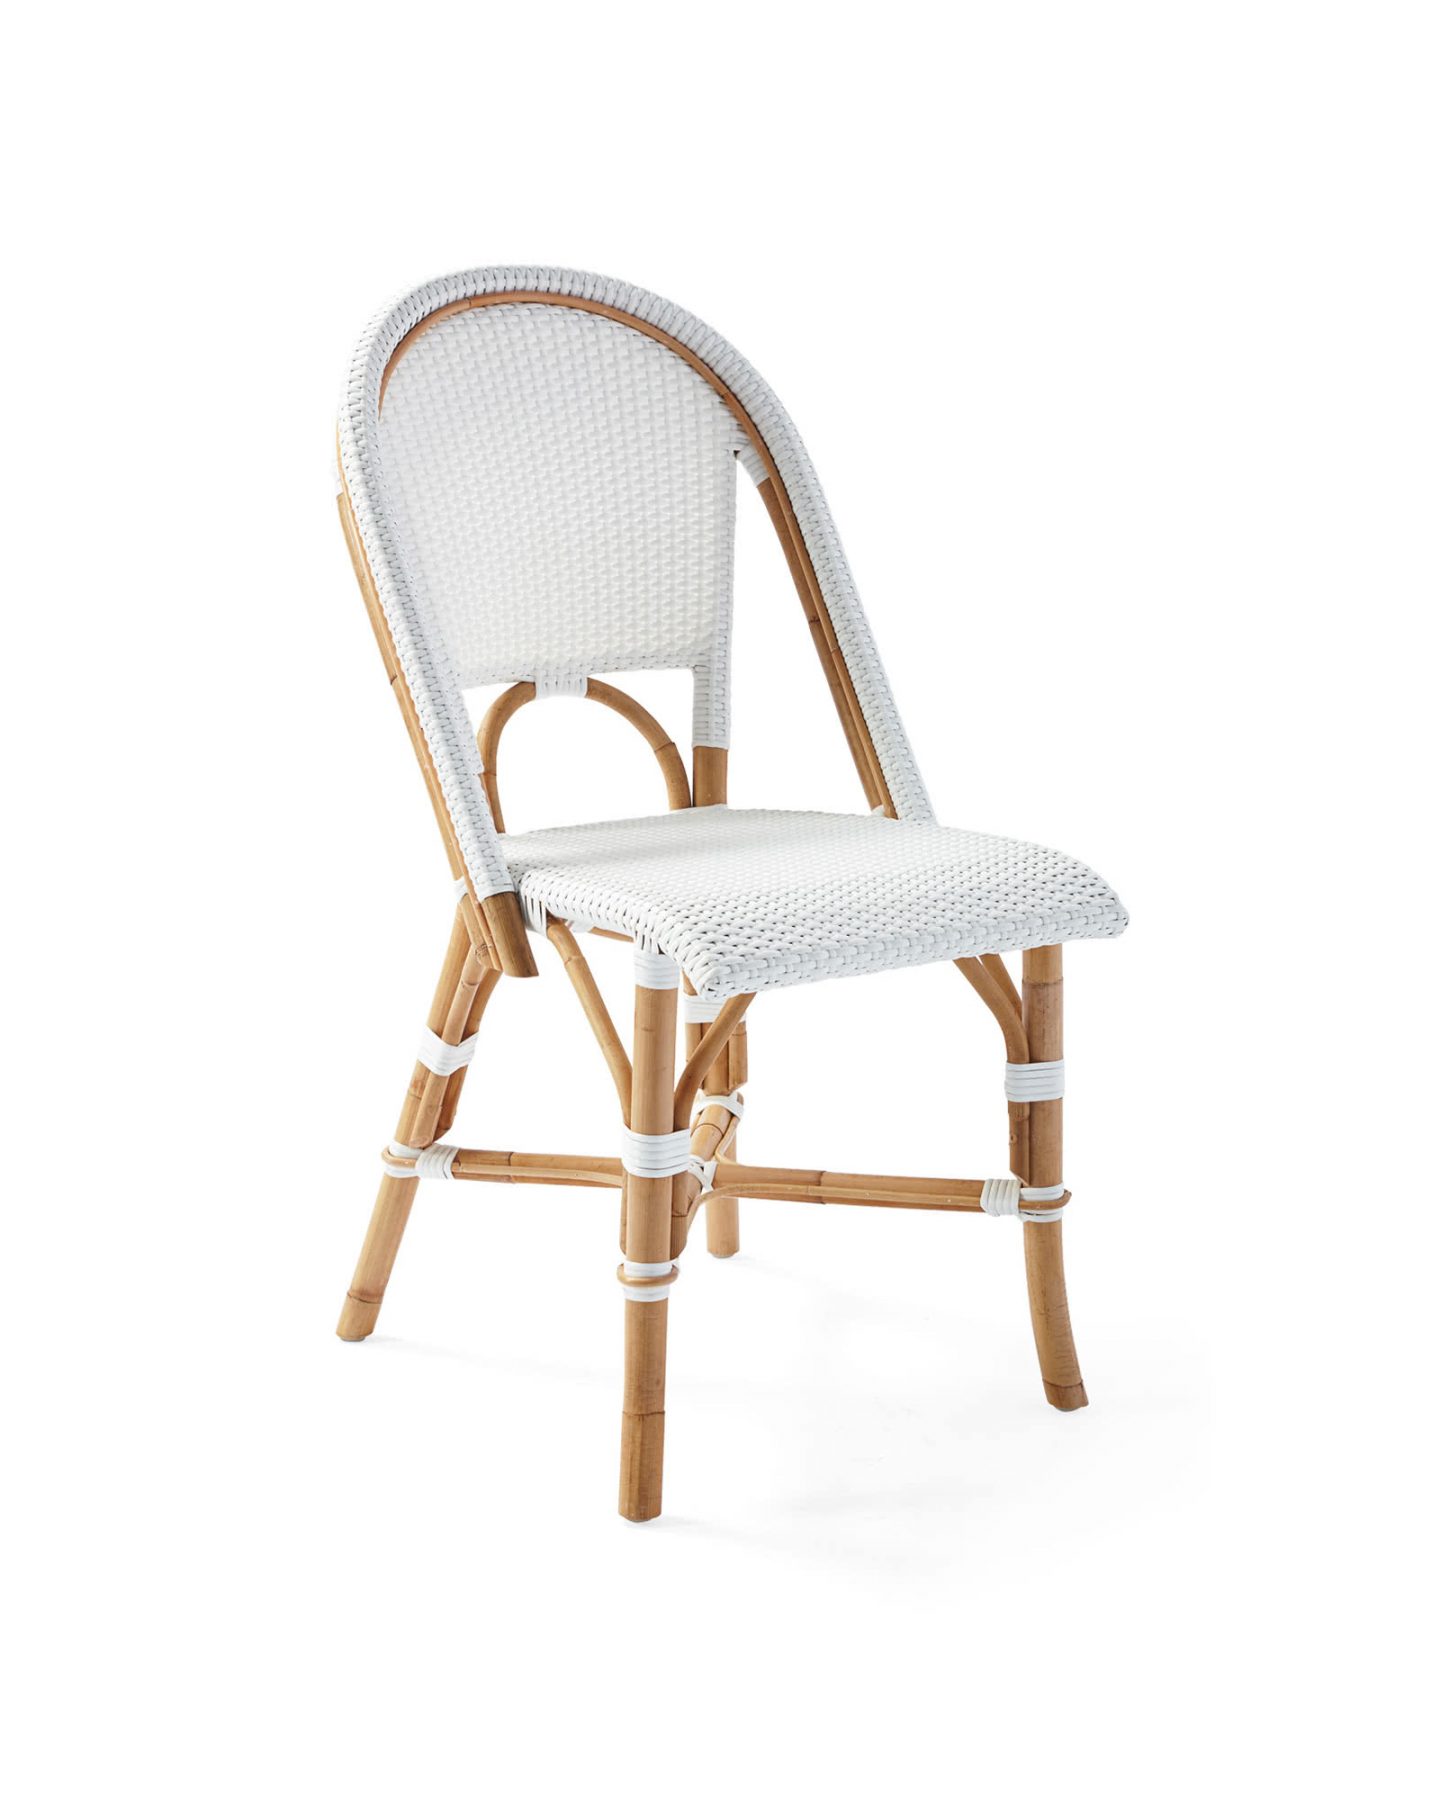 French bistro woven Riviera side chair.